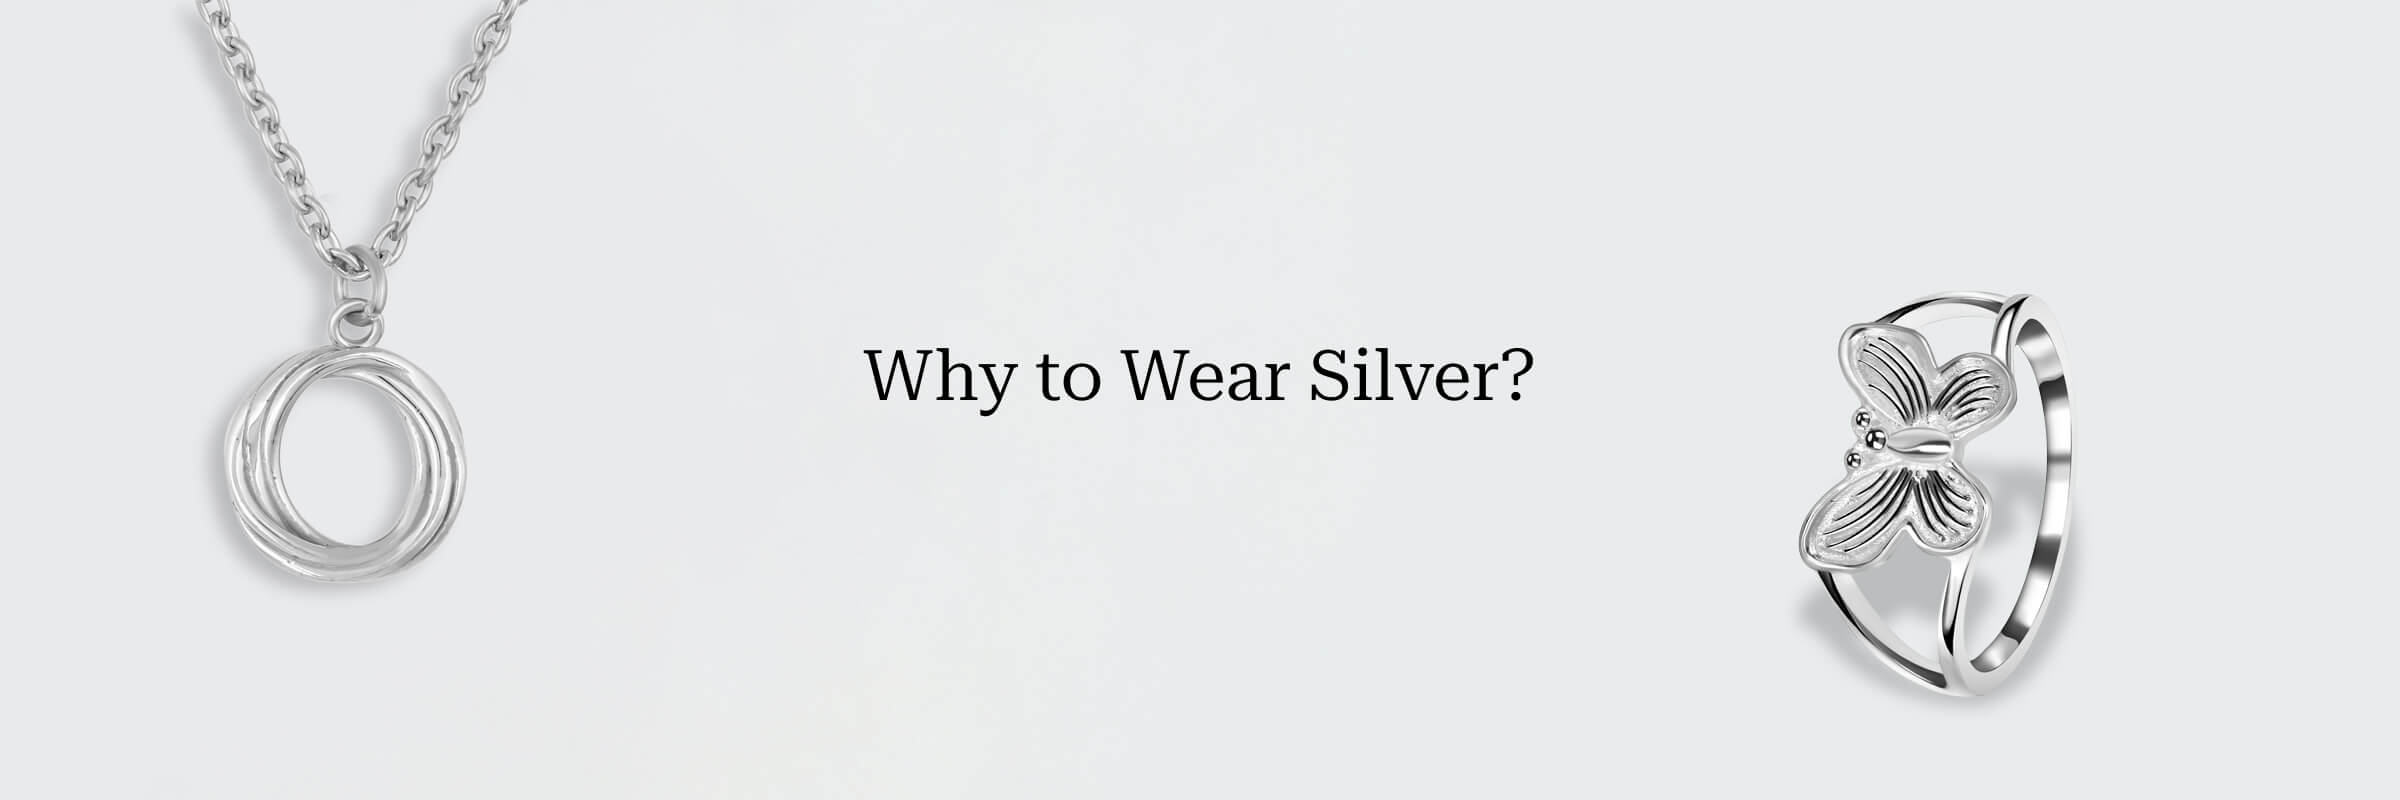 Benefits of Wearing Silver